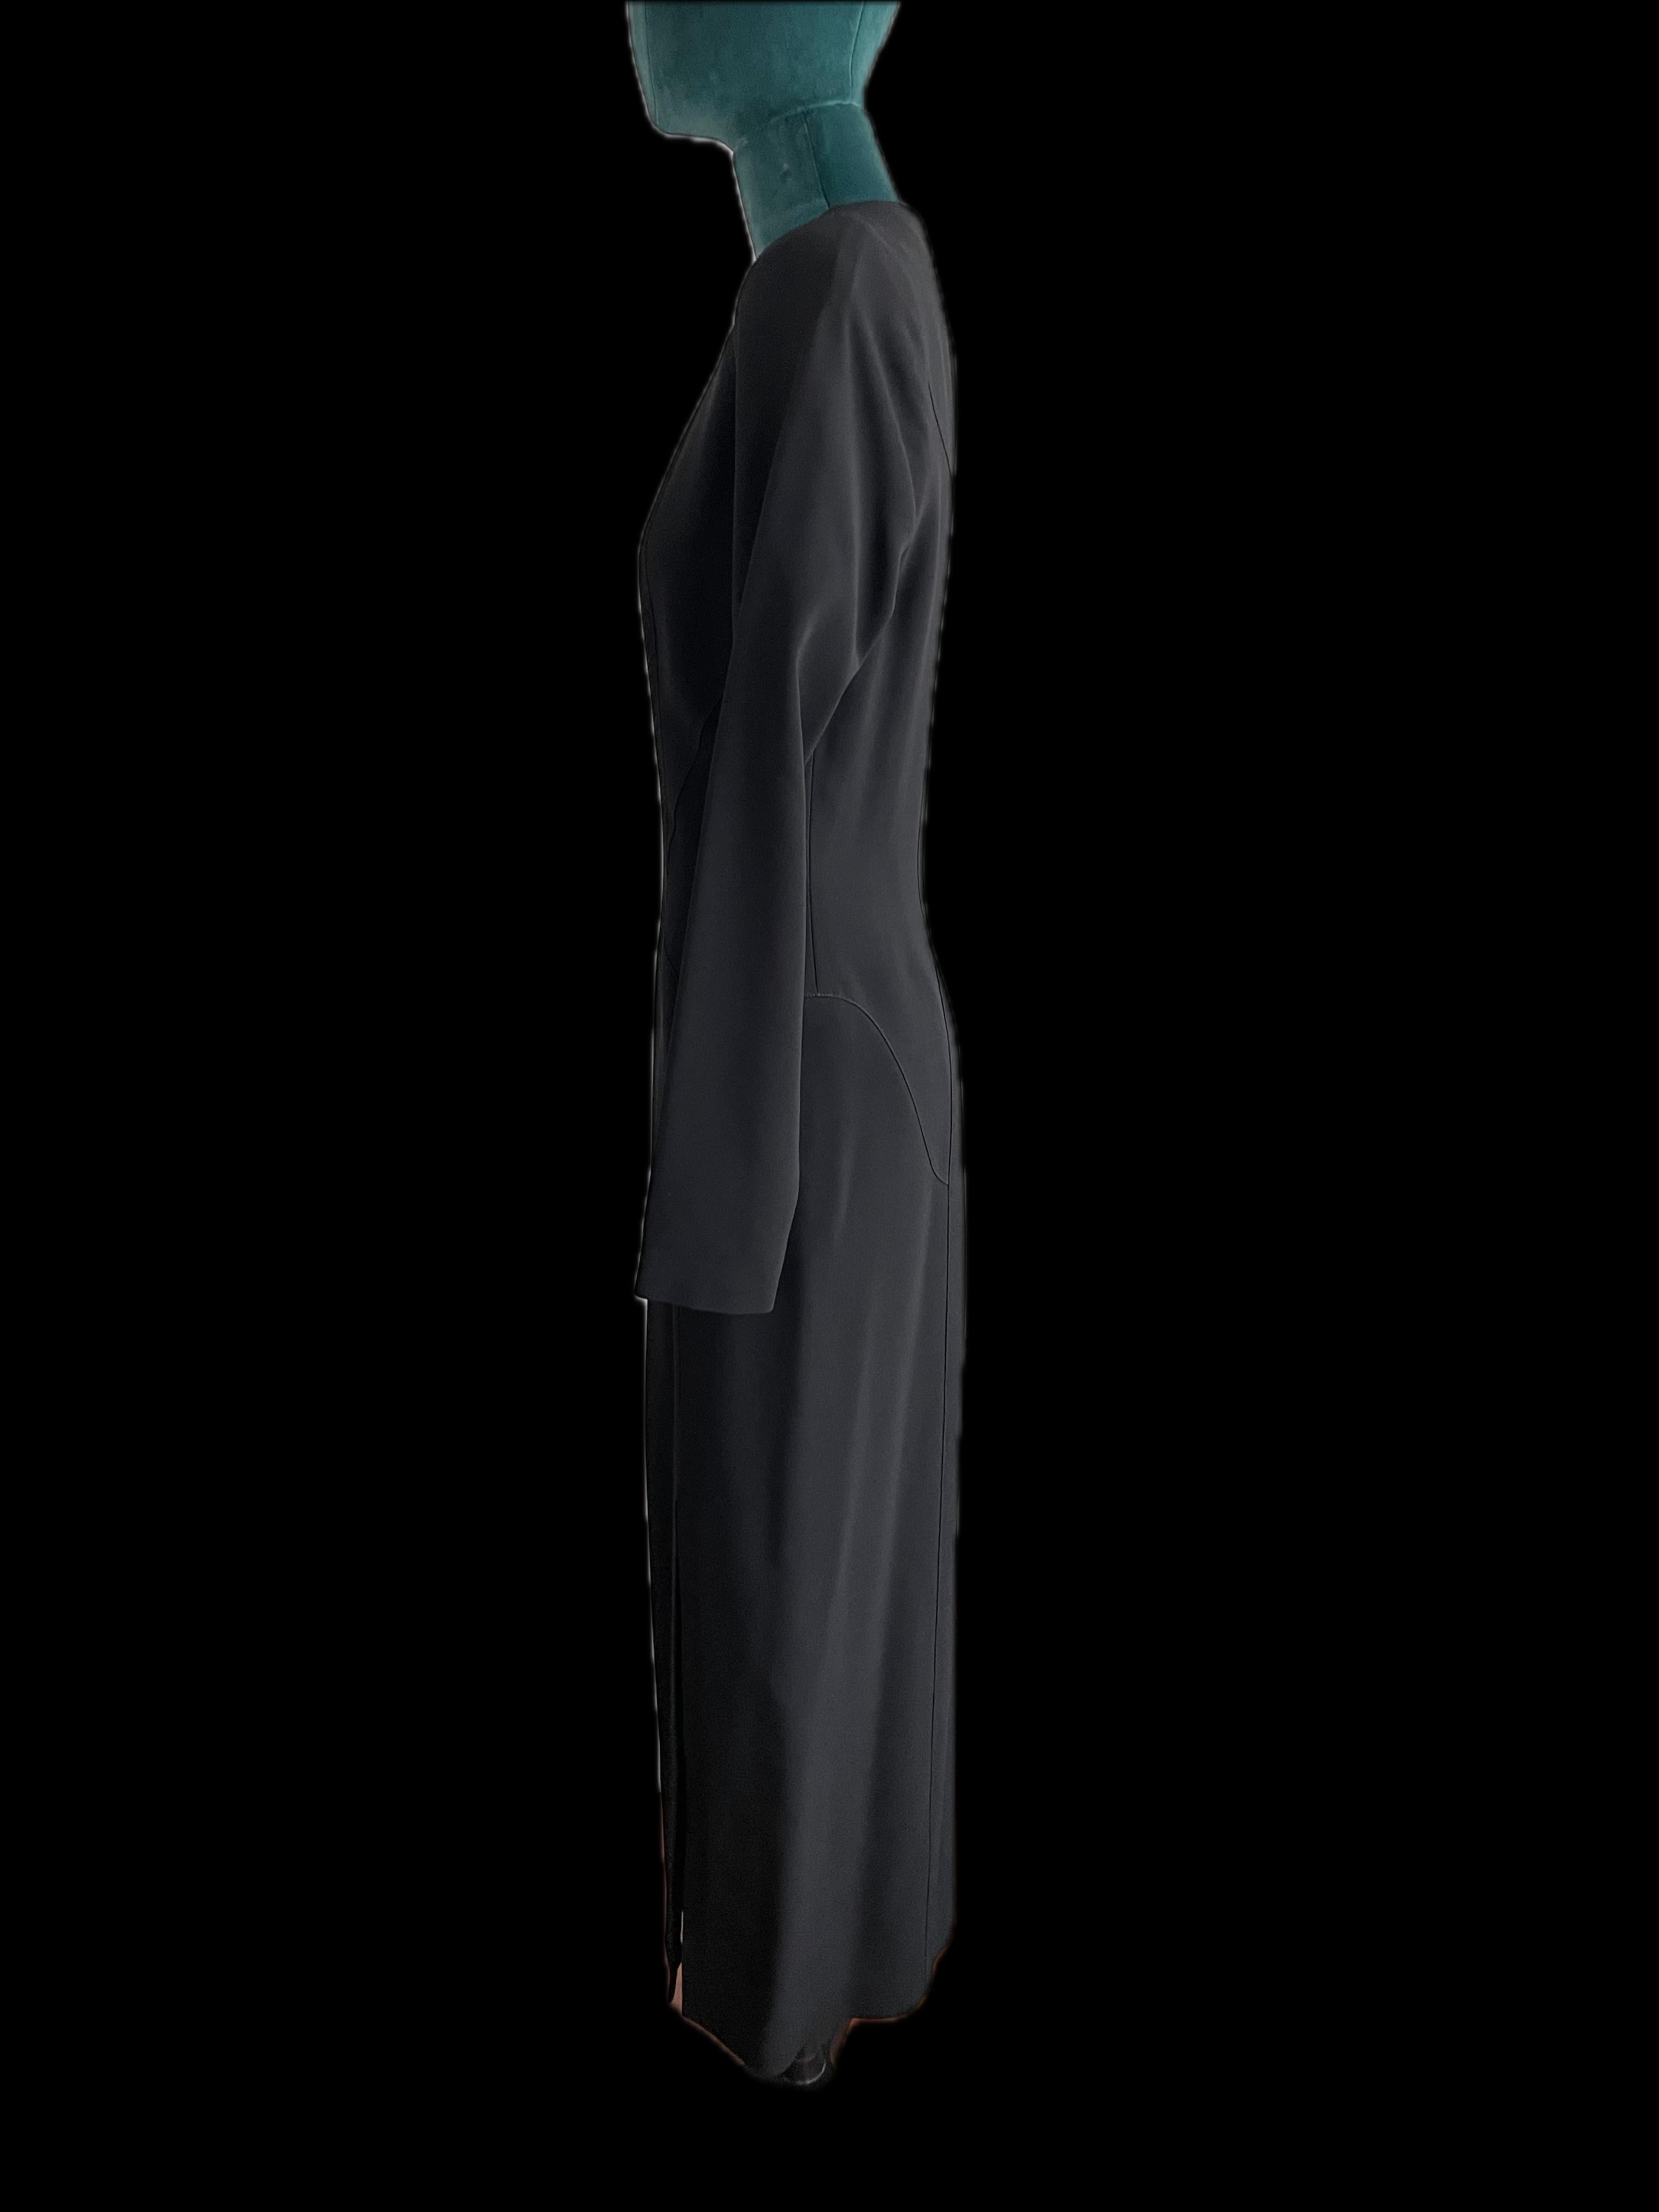 
Introducing the epitome of modern sophistication: the Mugler Black Long Sleeve Gown. Crafted with meticulous attention to detail and designed to accentuate the body's natural curves, this exquisite piece exudes timeless elegance and contemporary